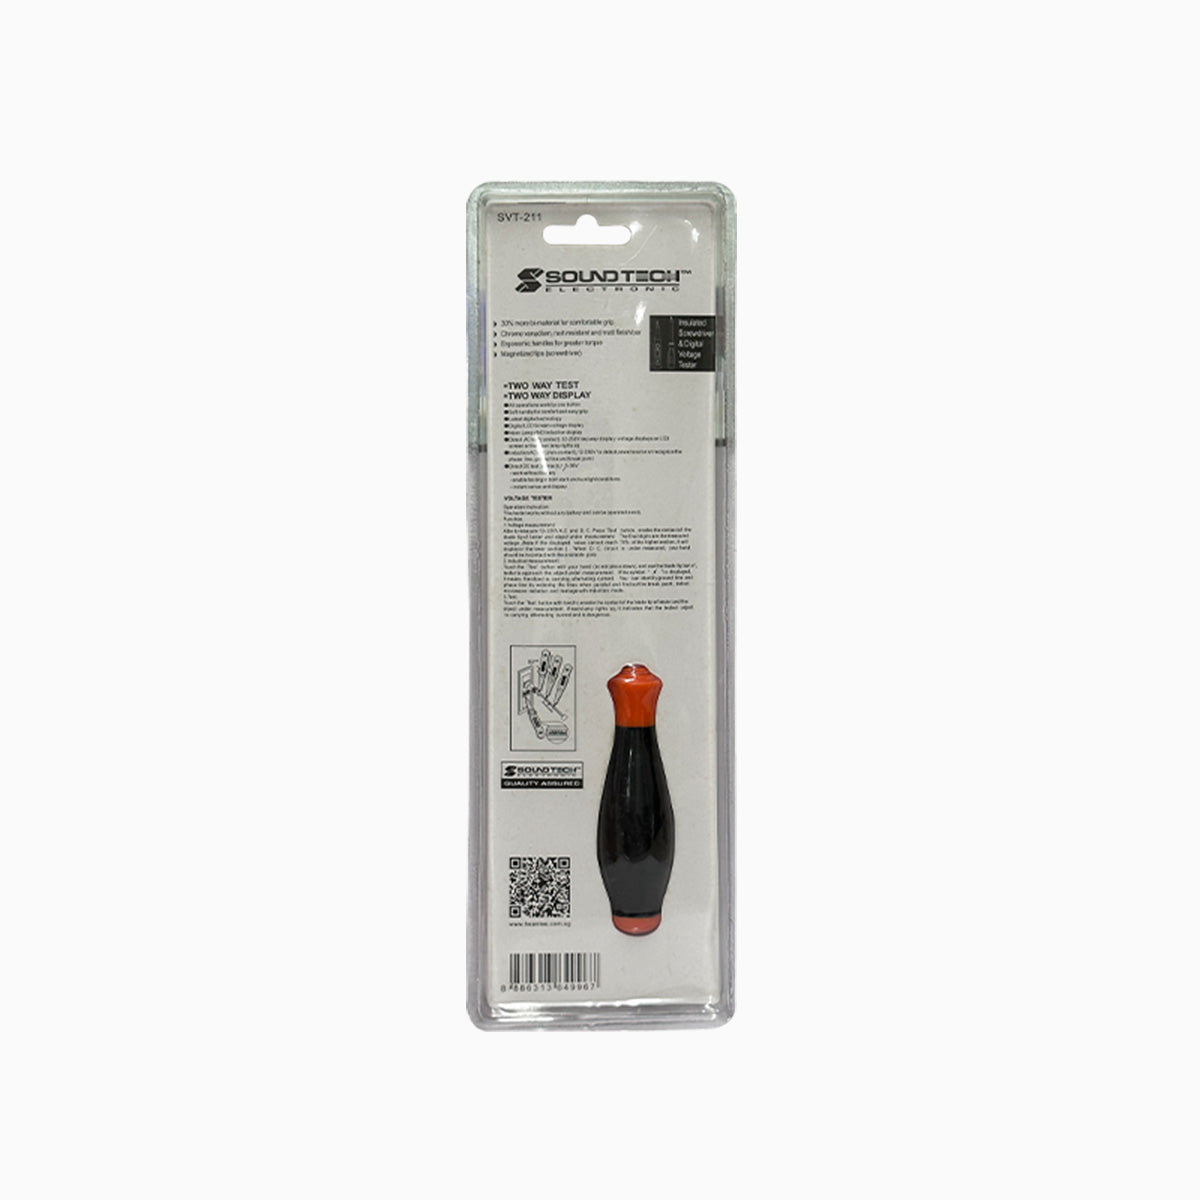 Multifunction Digital Voltage Tester and Insulated Screwdriver